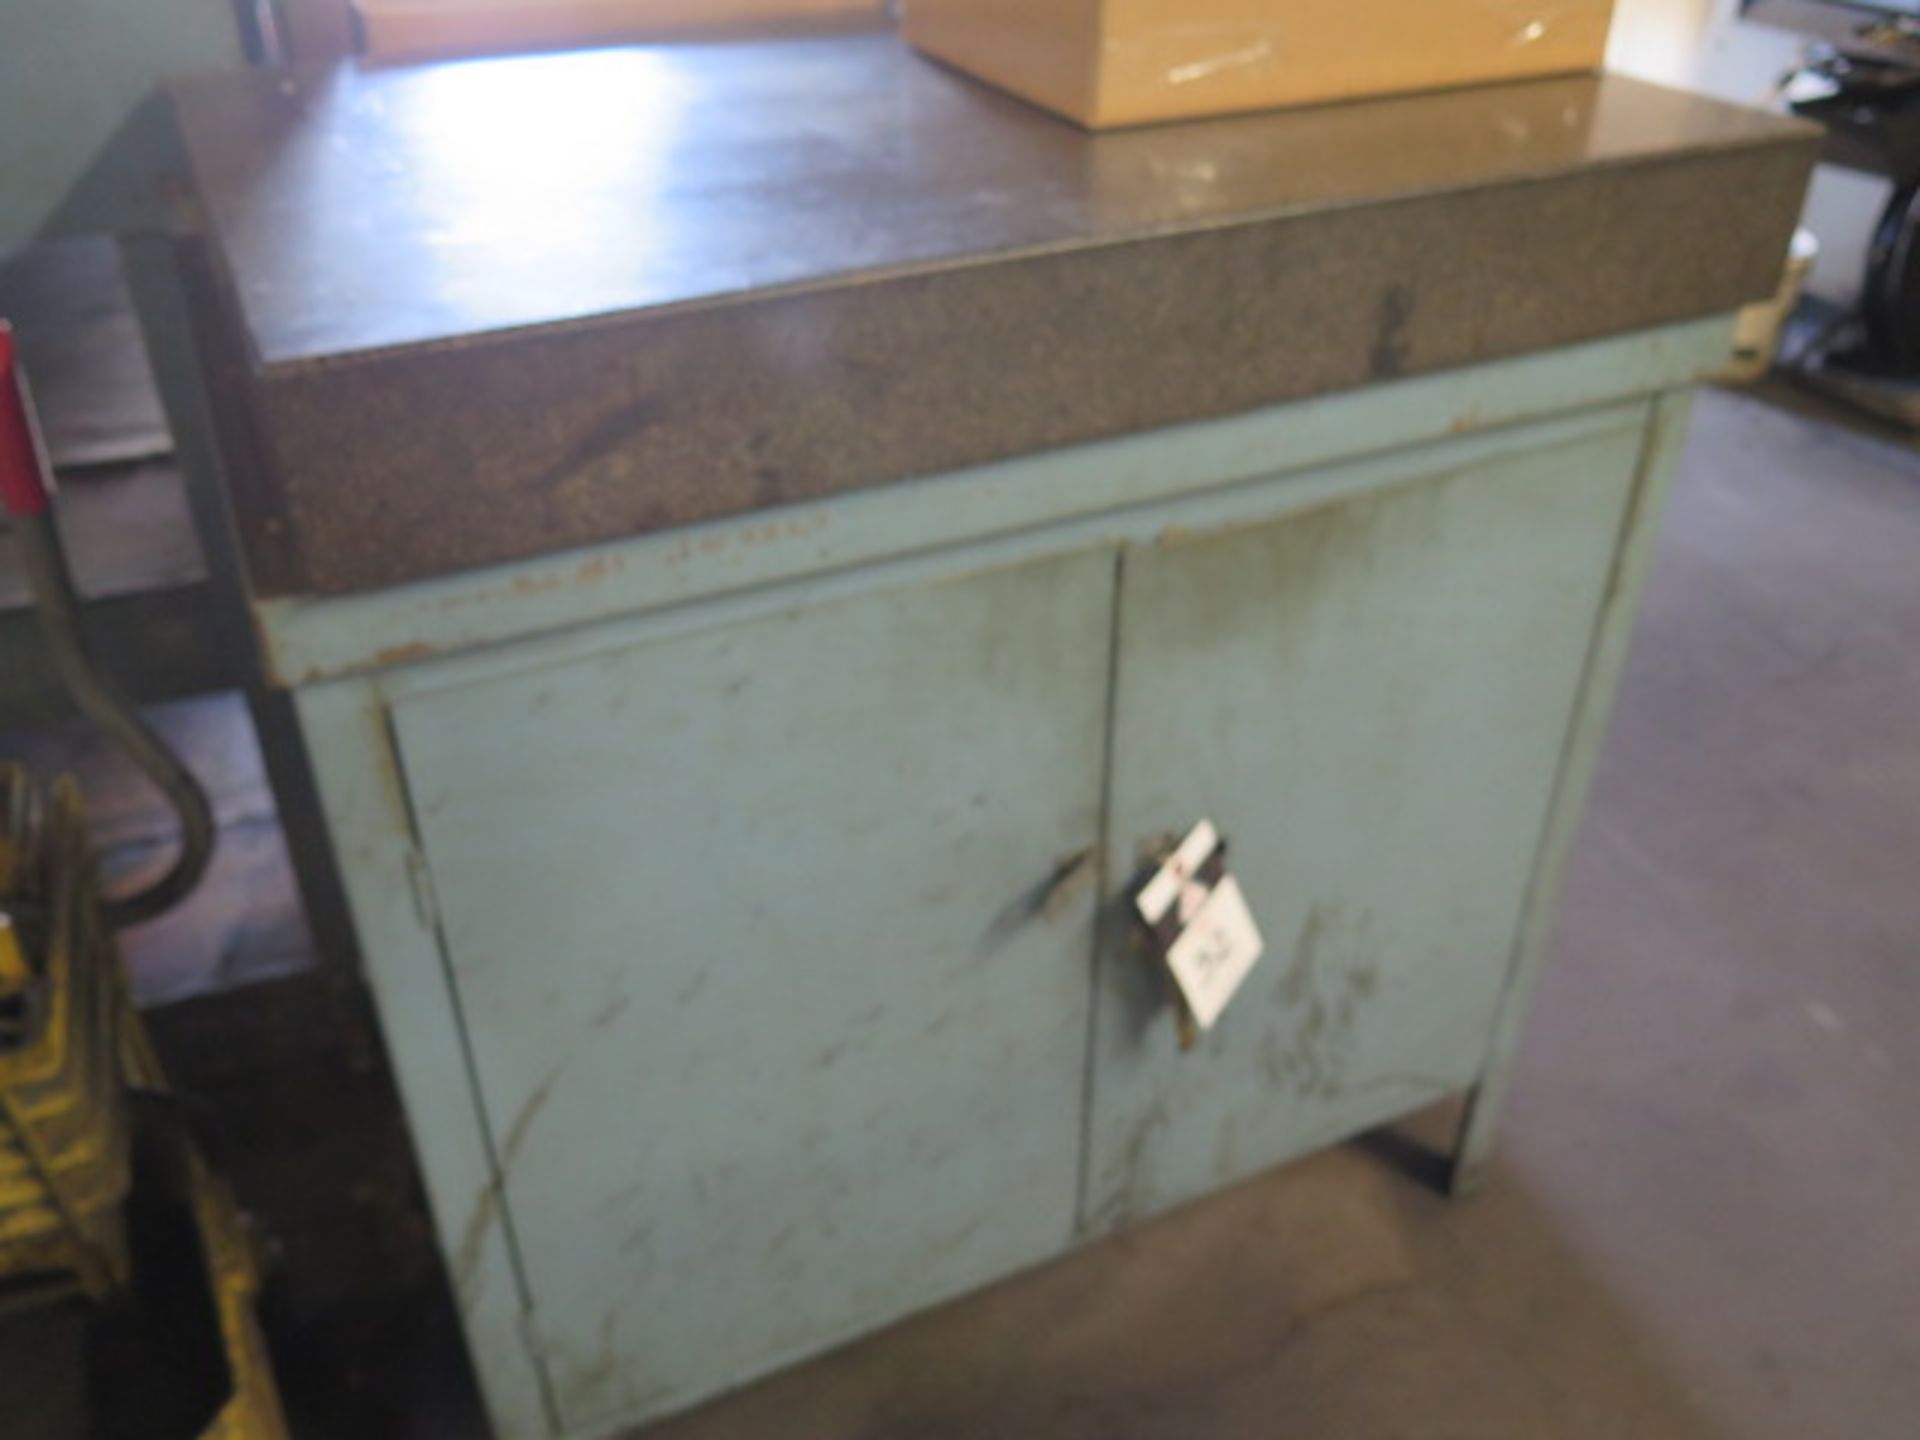 24” x 36” x 4” Granite Surface Plate w/ Cabinet Base (SOLD AS-IS - NO WARRANTY) - Image 2 of 4